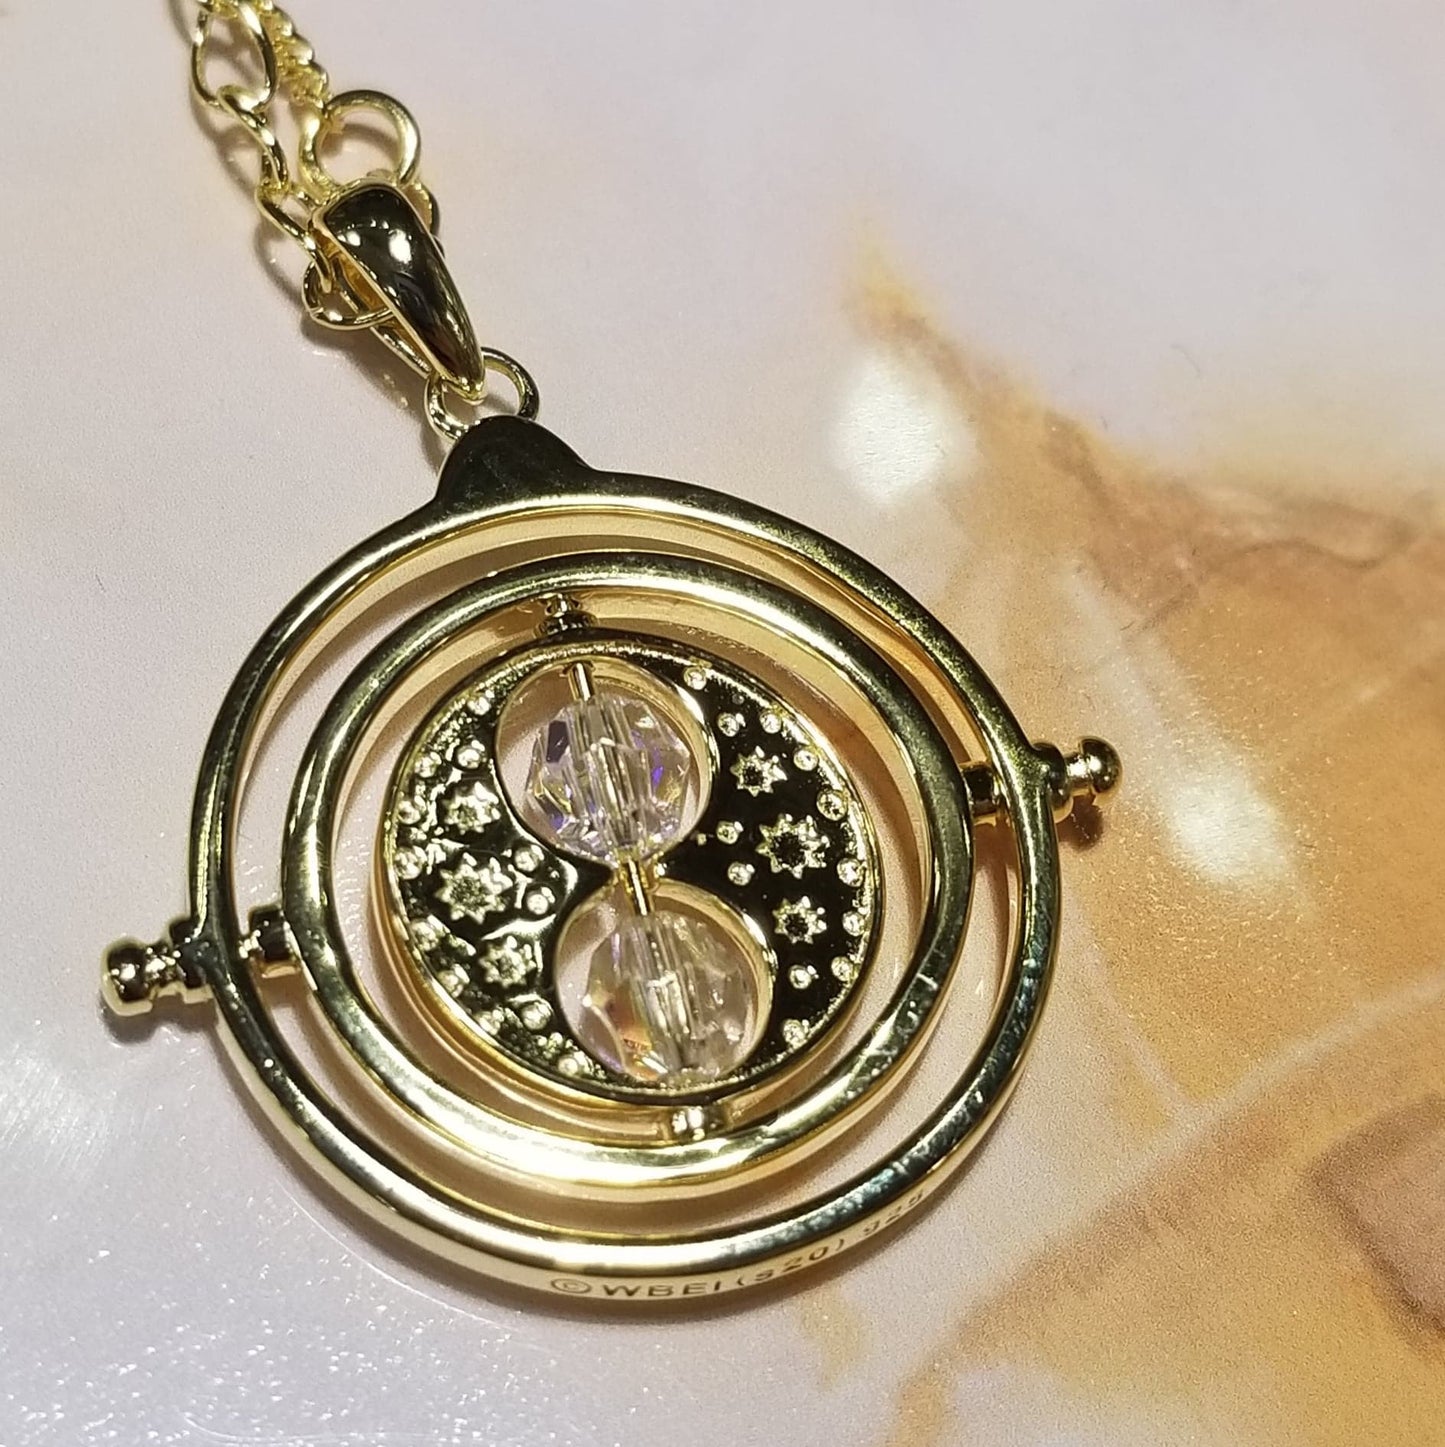 Harry Potter Time Turner Gold Plated Necklace with Swarovski Crystals